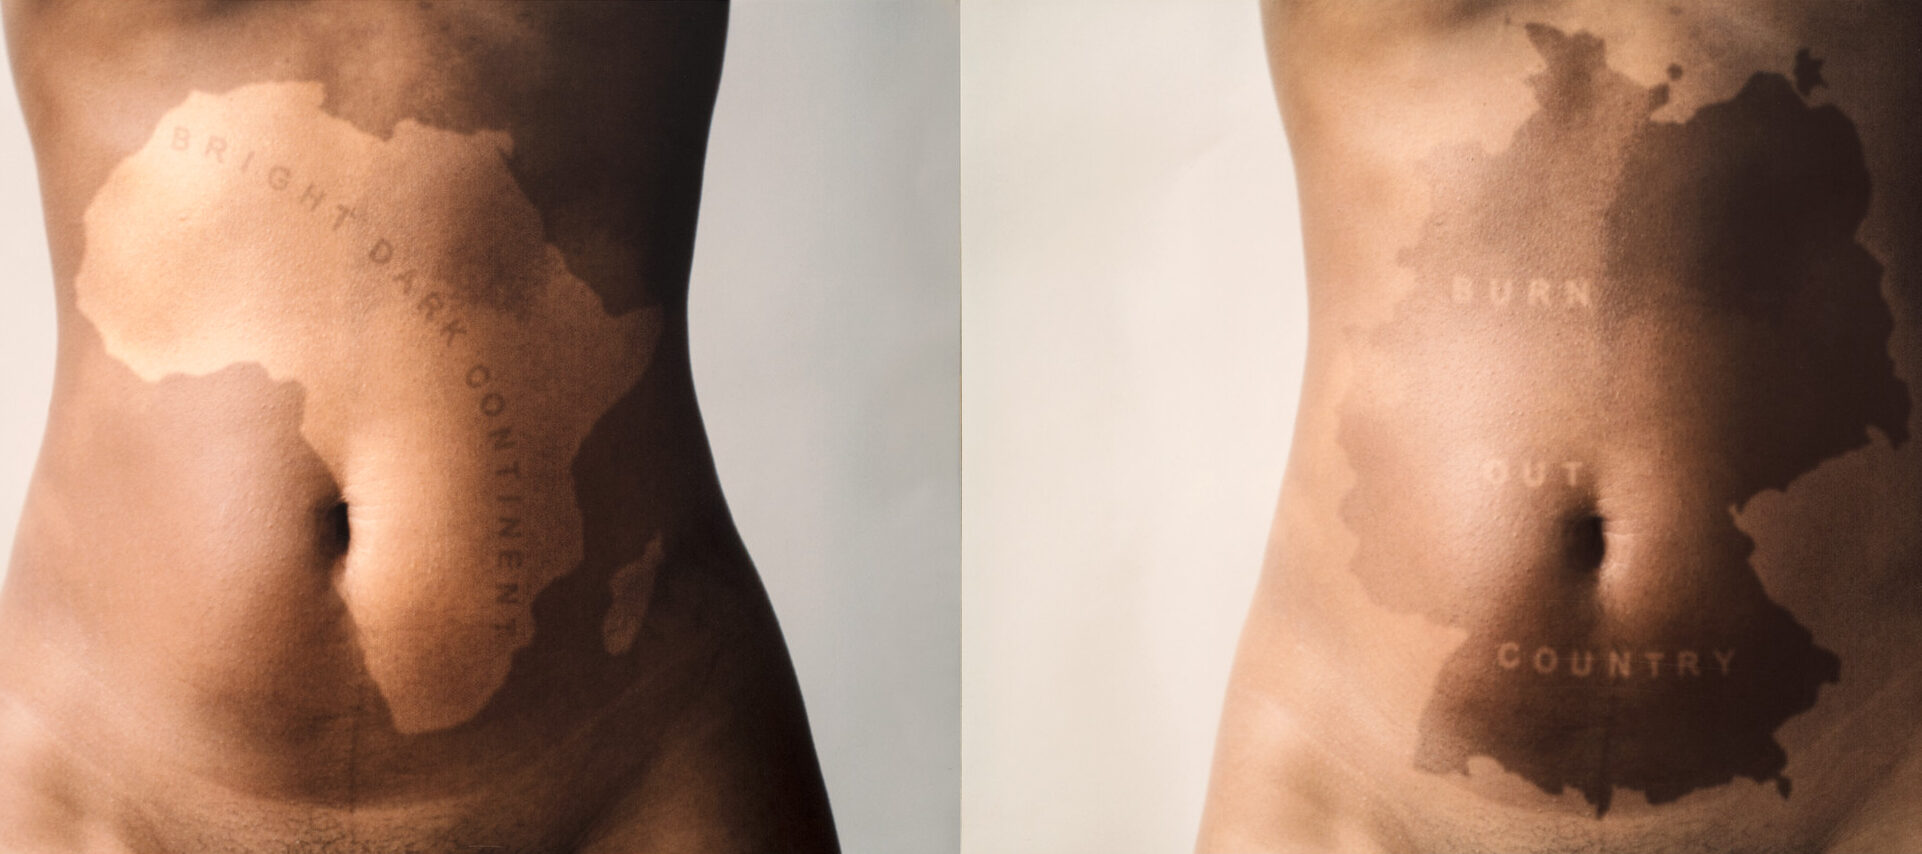 There are two nude torsos side by side. On the left, the torso has a lighter patch of skin that outlines Africa and reads 'Bright Dark Continent.' On the right, the torso has a darker patch of skin that outlines Germany and in light letters reads 'Burn Out Country.'